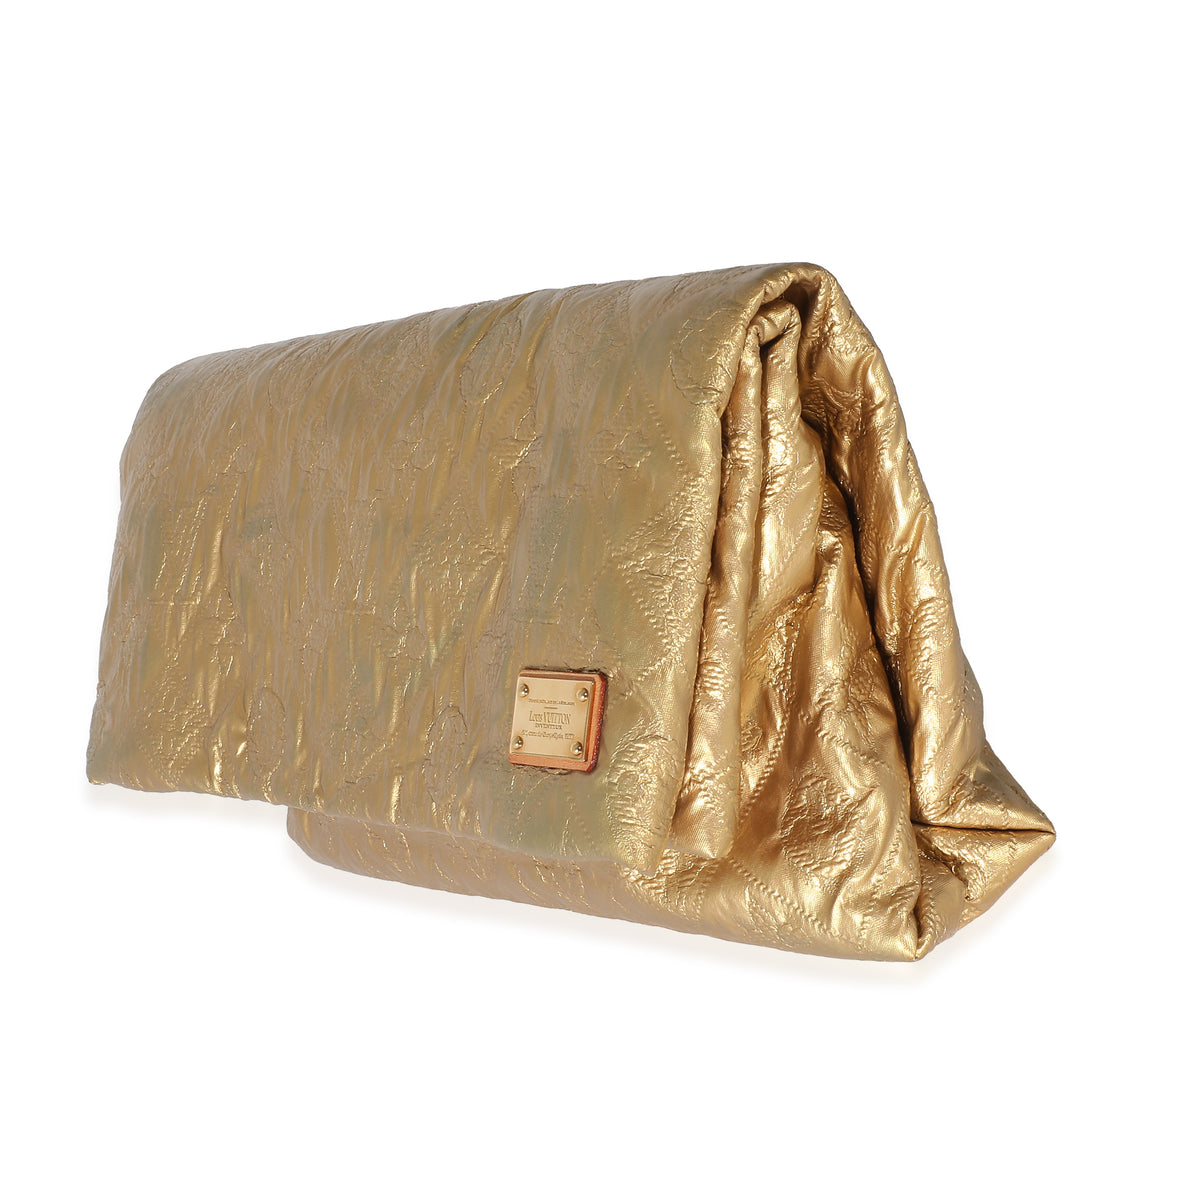 A LOUIS VUITTON QUILTED POUCH GOLD LIMELIGHT CLUTCH BAG, with